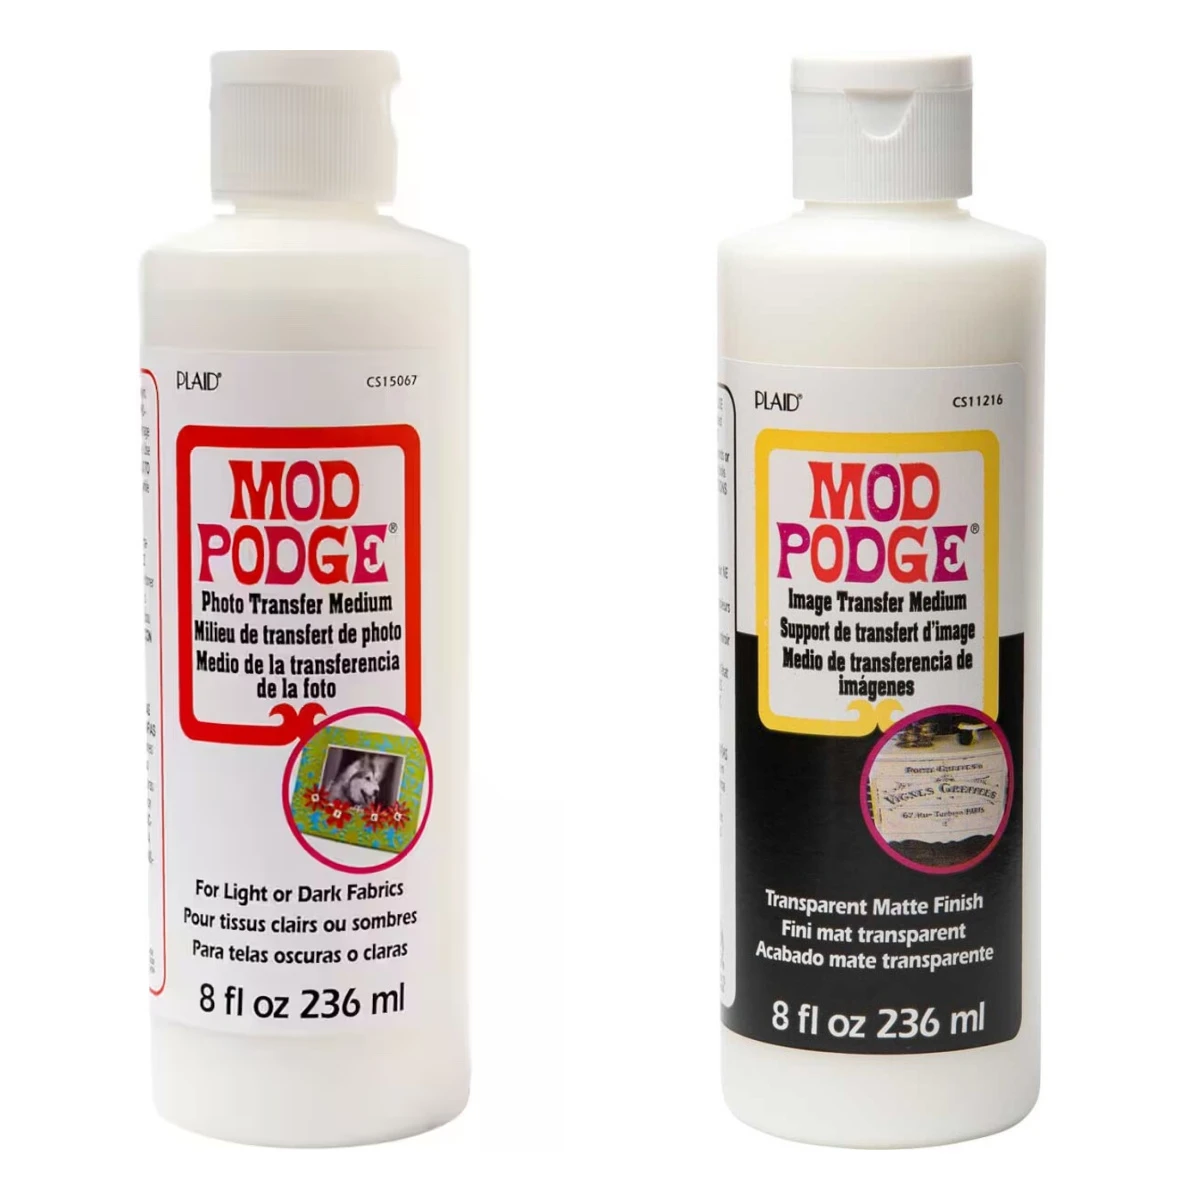 Creative Hobby Supplies: What's the difference? - Mod Podge, PVA &  Decopatch Glue